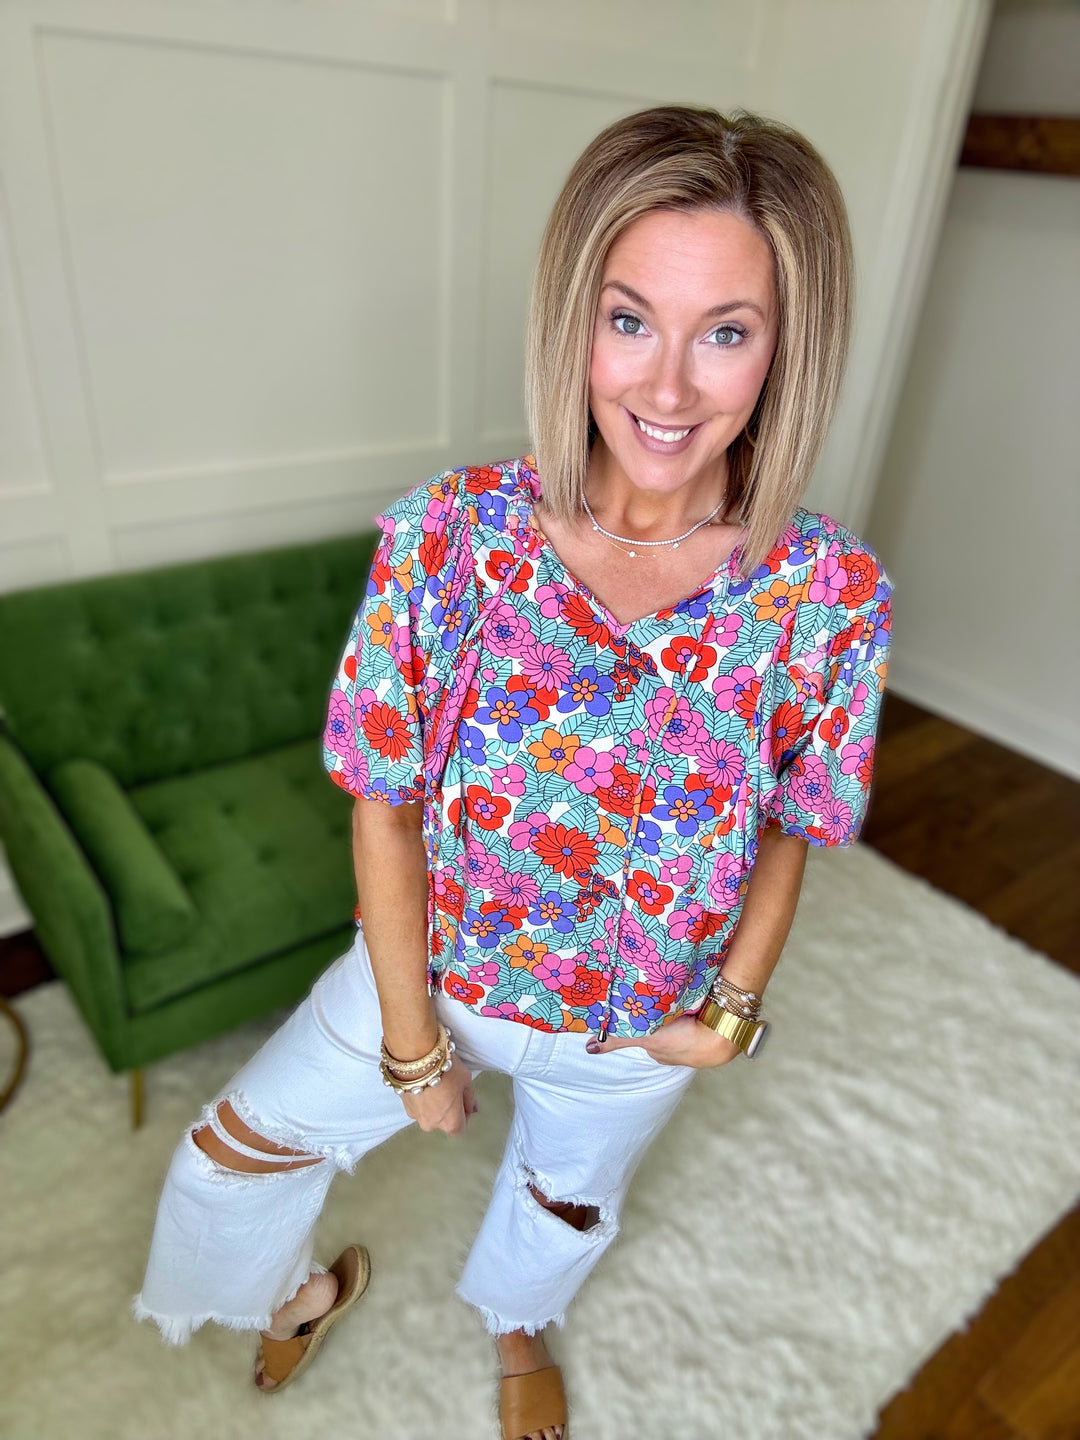 The Floral Frenzy Blouse